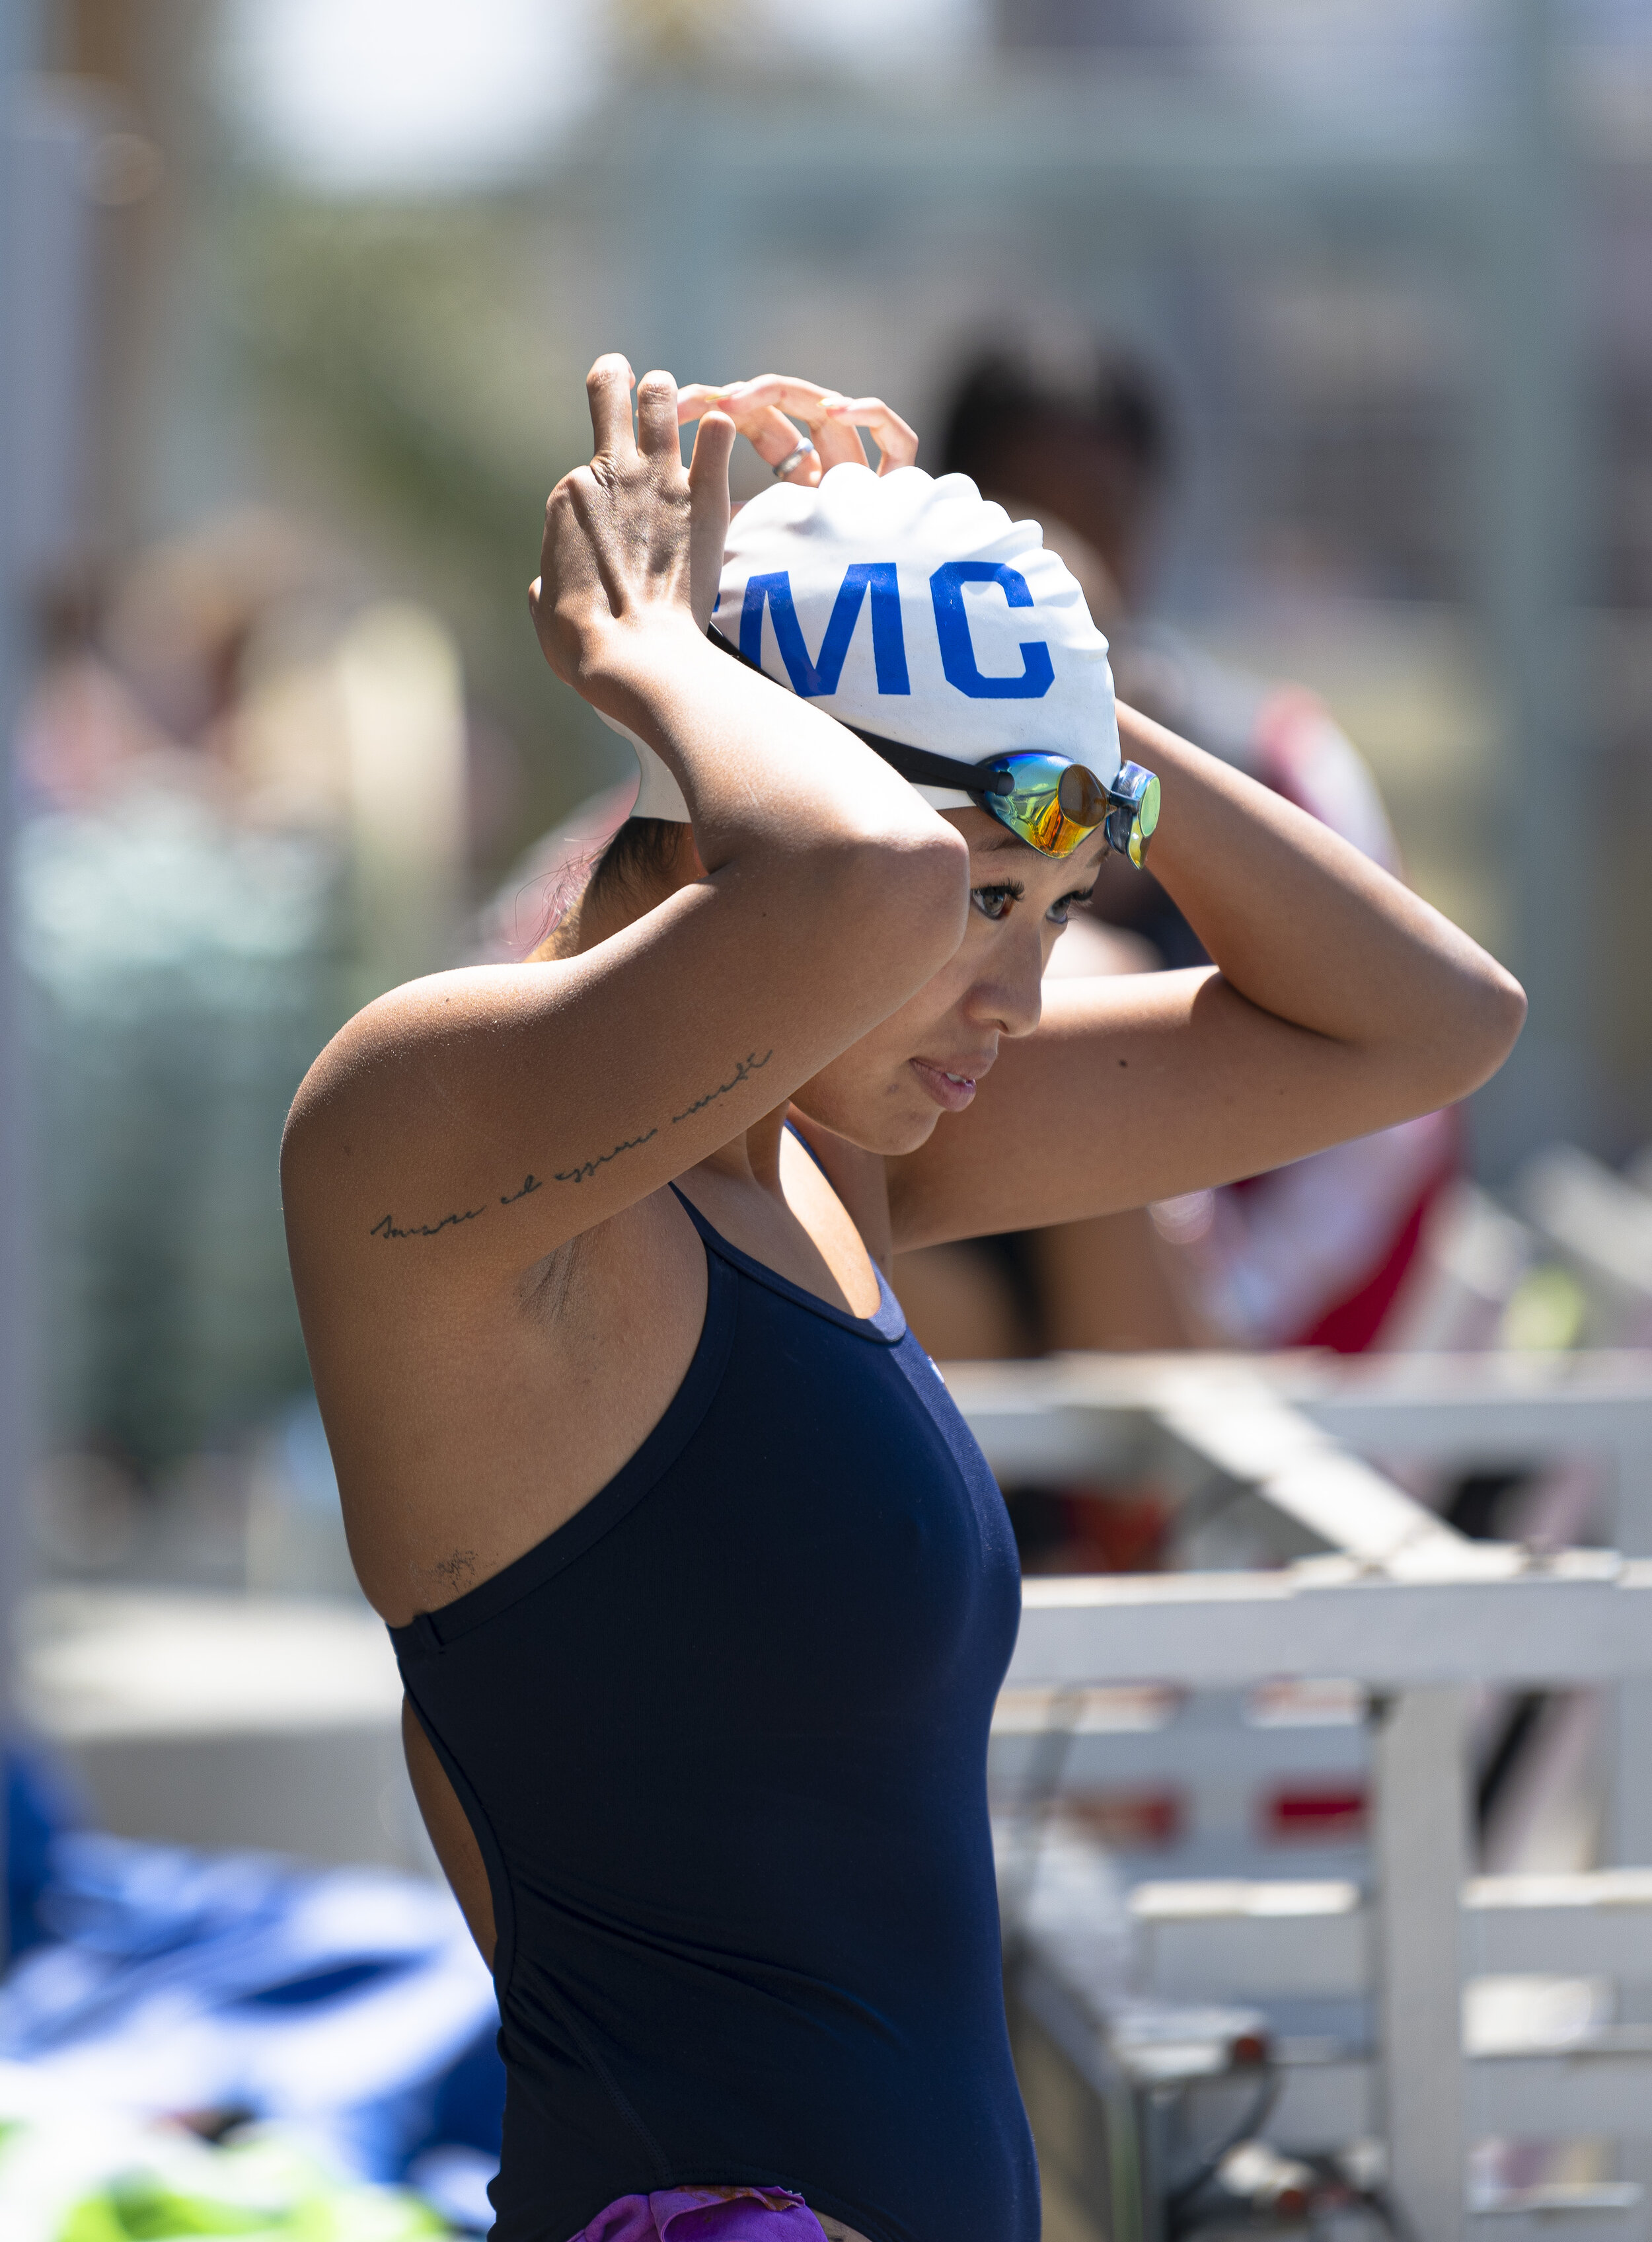  Risa Akatsu prepares her goggles for the meet with Bakersfieldd college on April 16, 2021, in Santa Monica Calif. After being forced to shutdown for nearly a year from the COVID-19 pandemic, the sports programs such as the swim team and other non-co